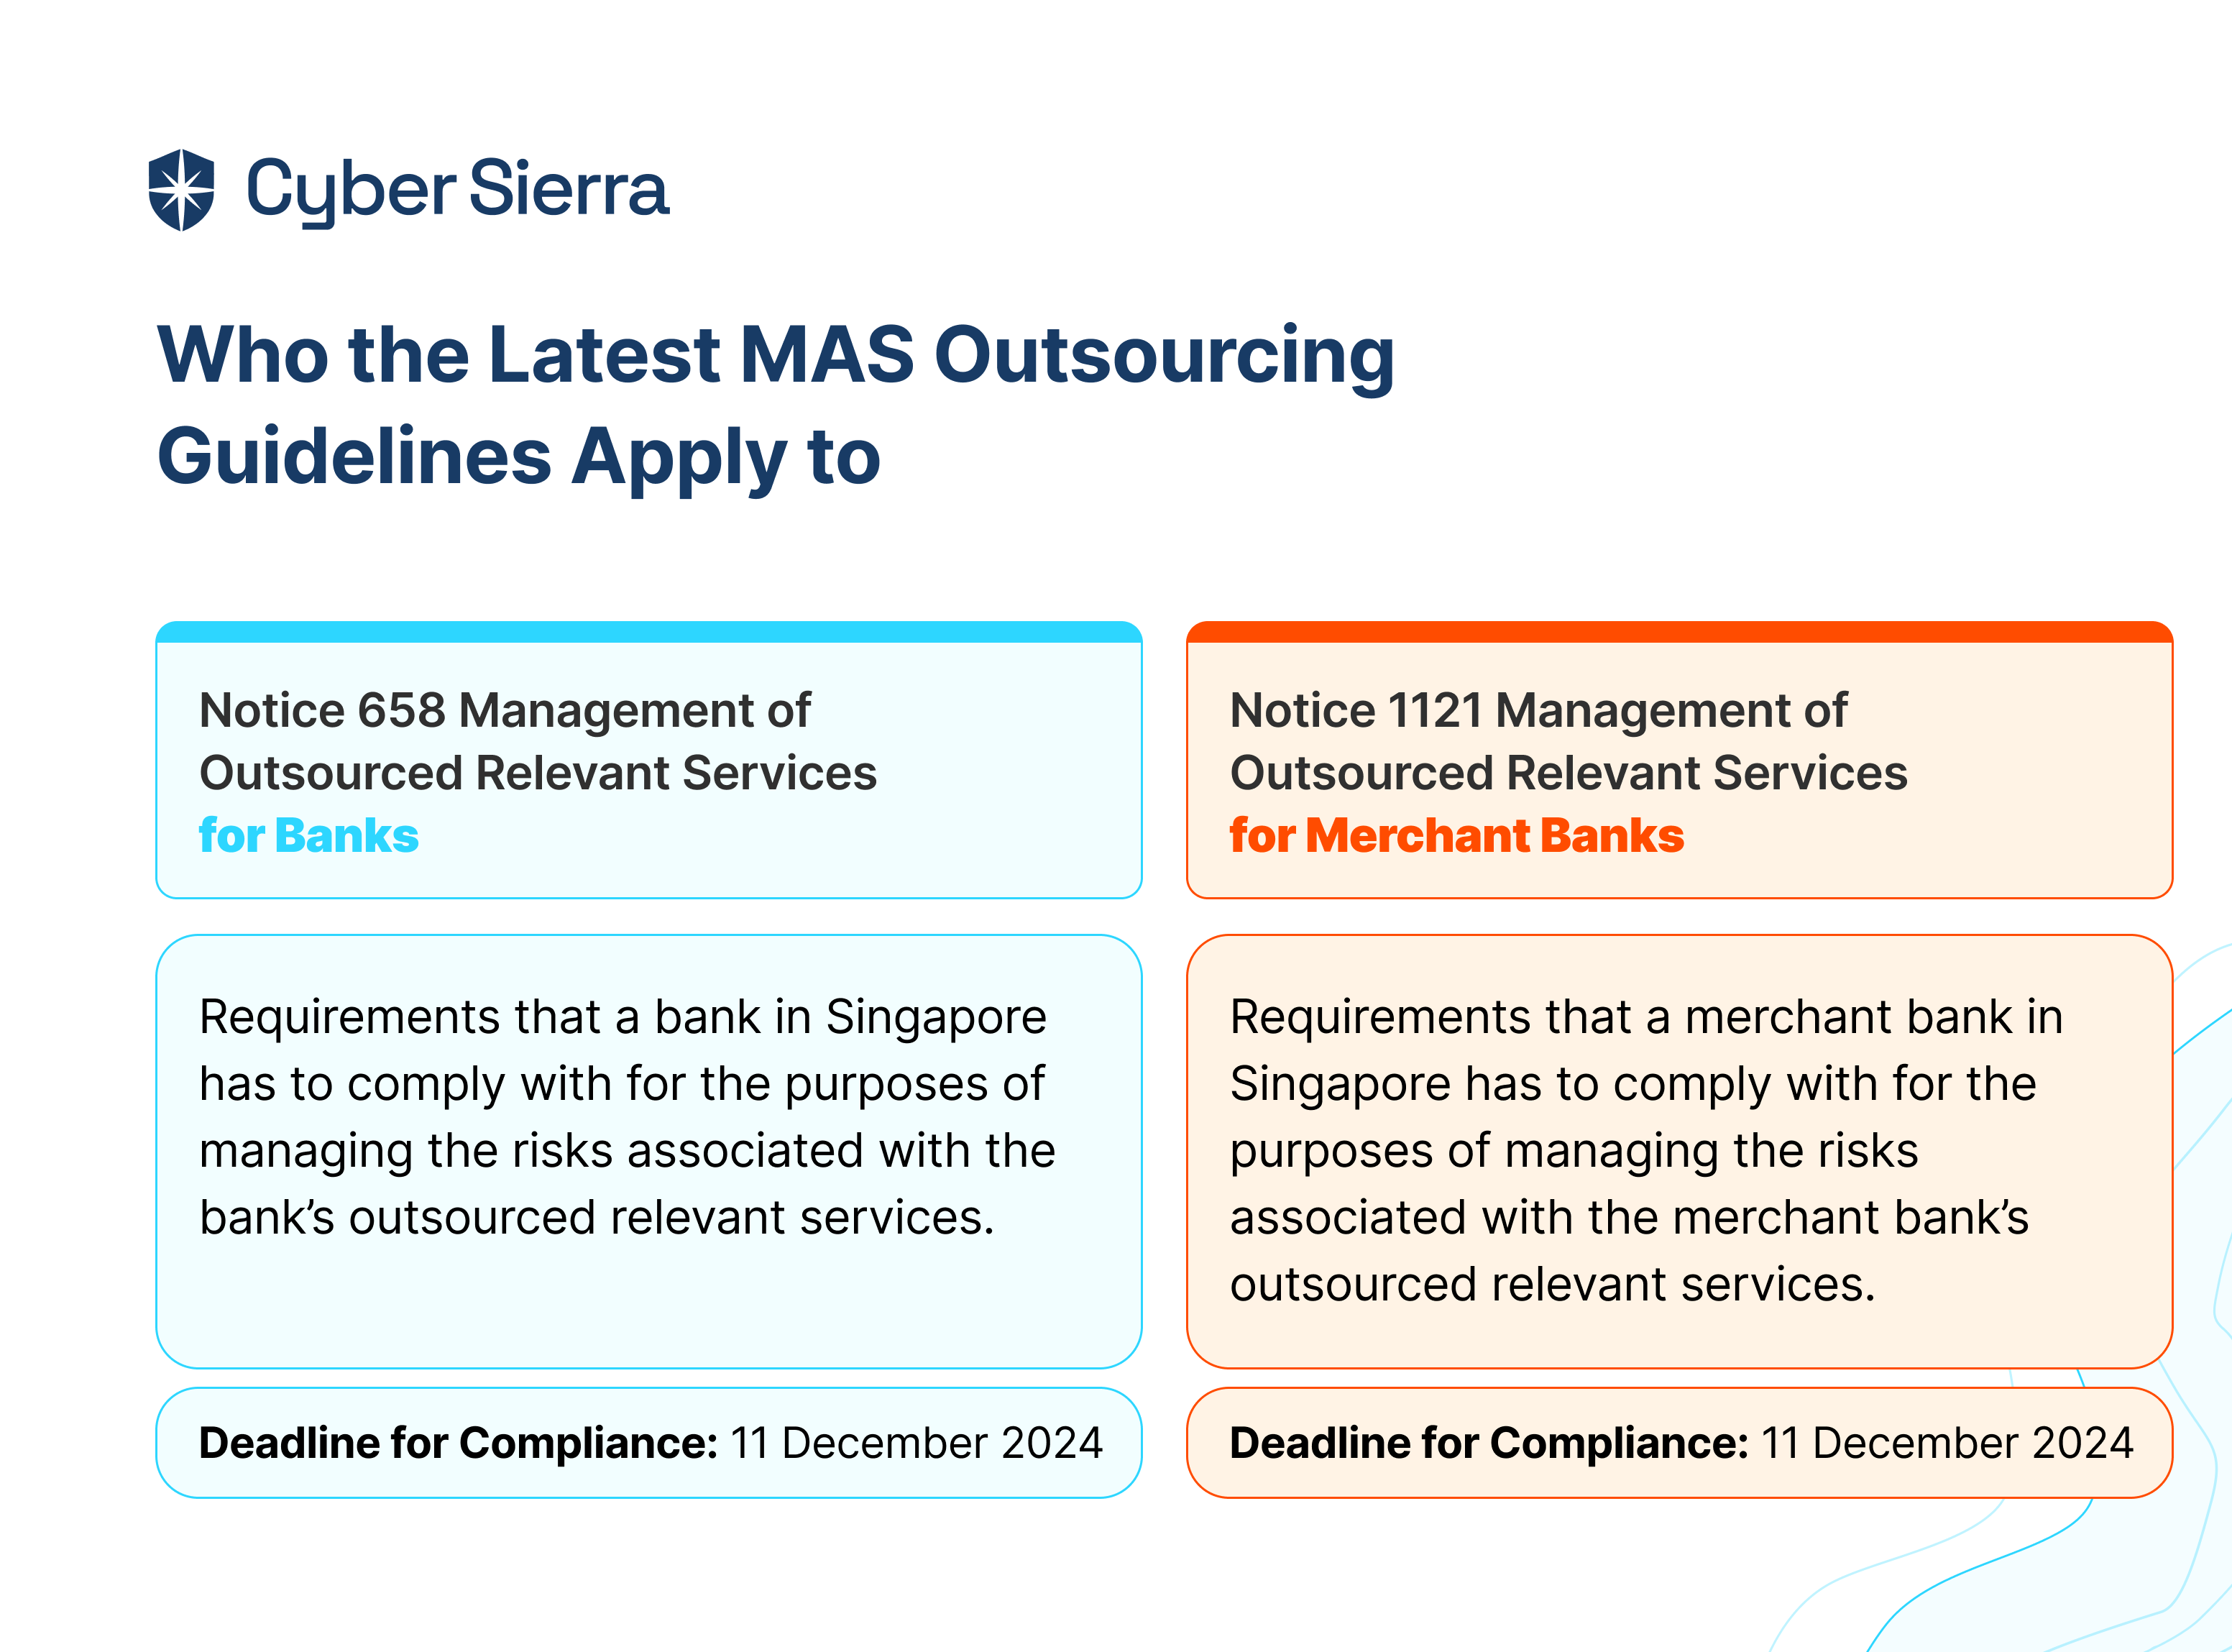 Who the Latest MAS Outsourcing Guidelines Apply to